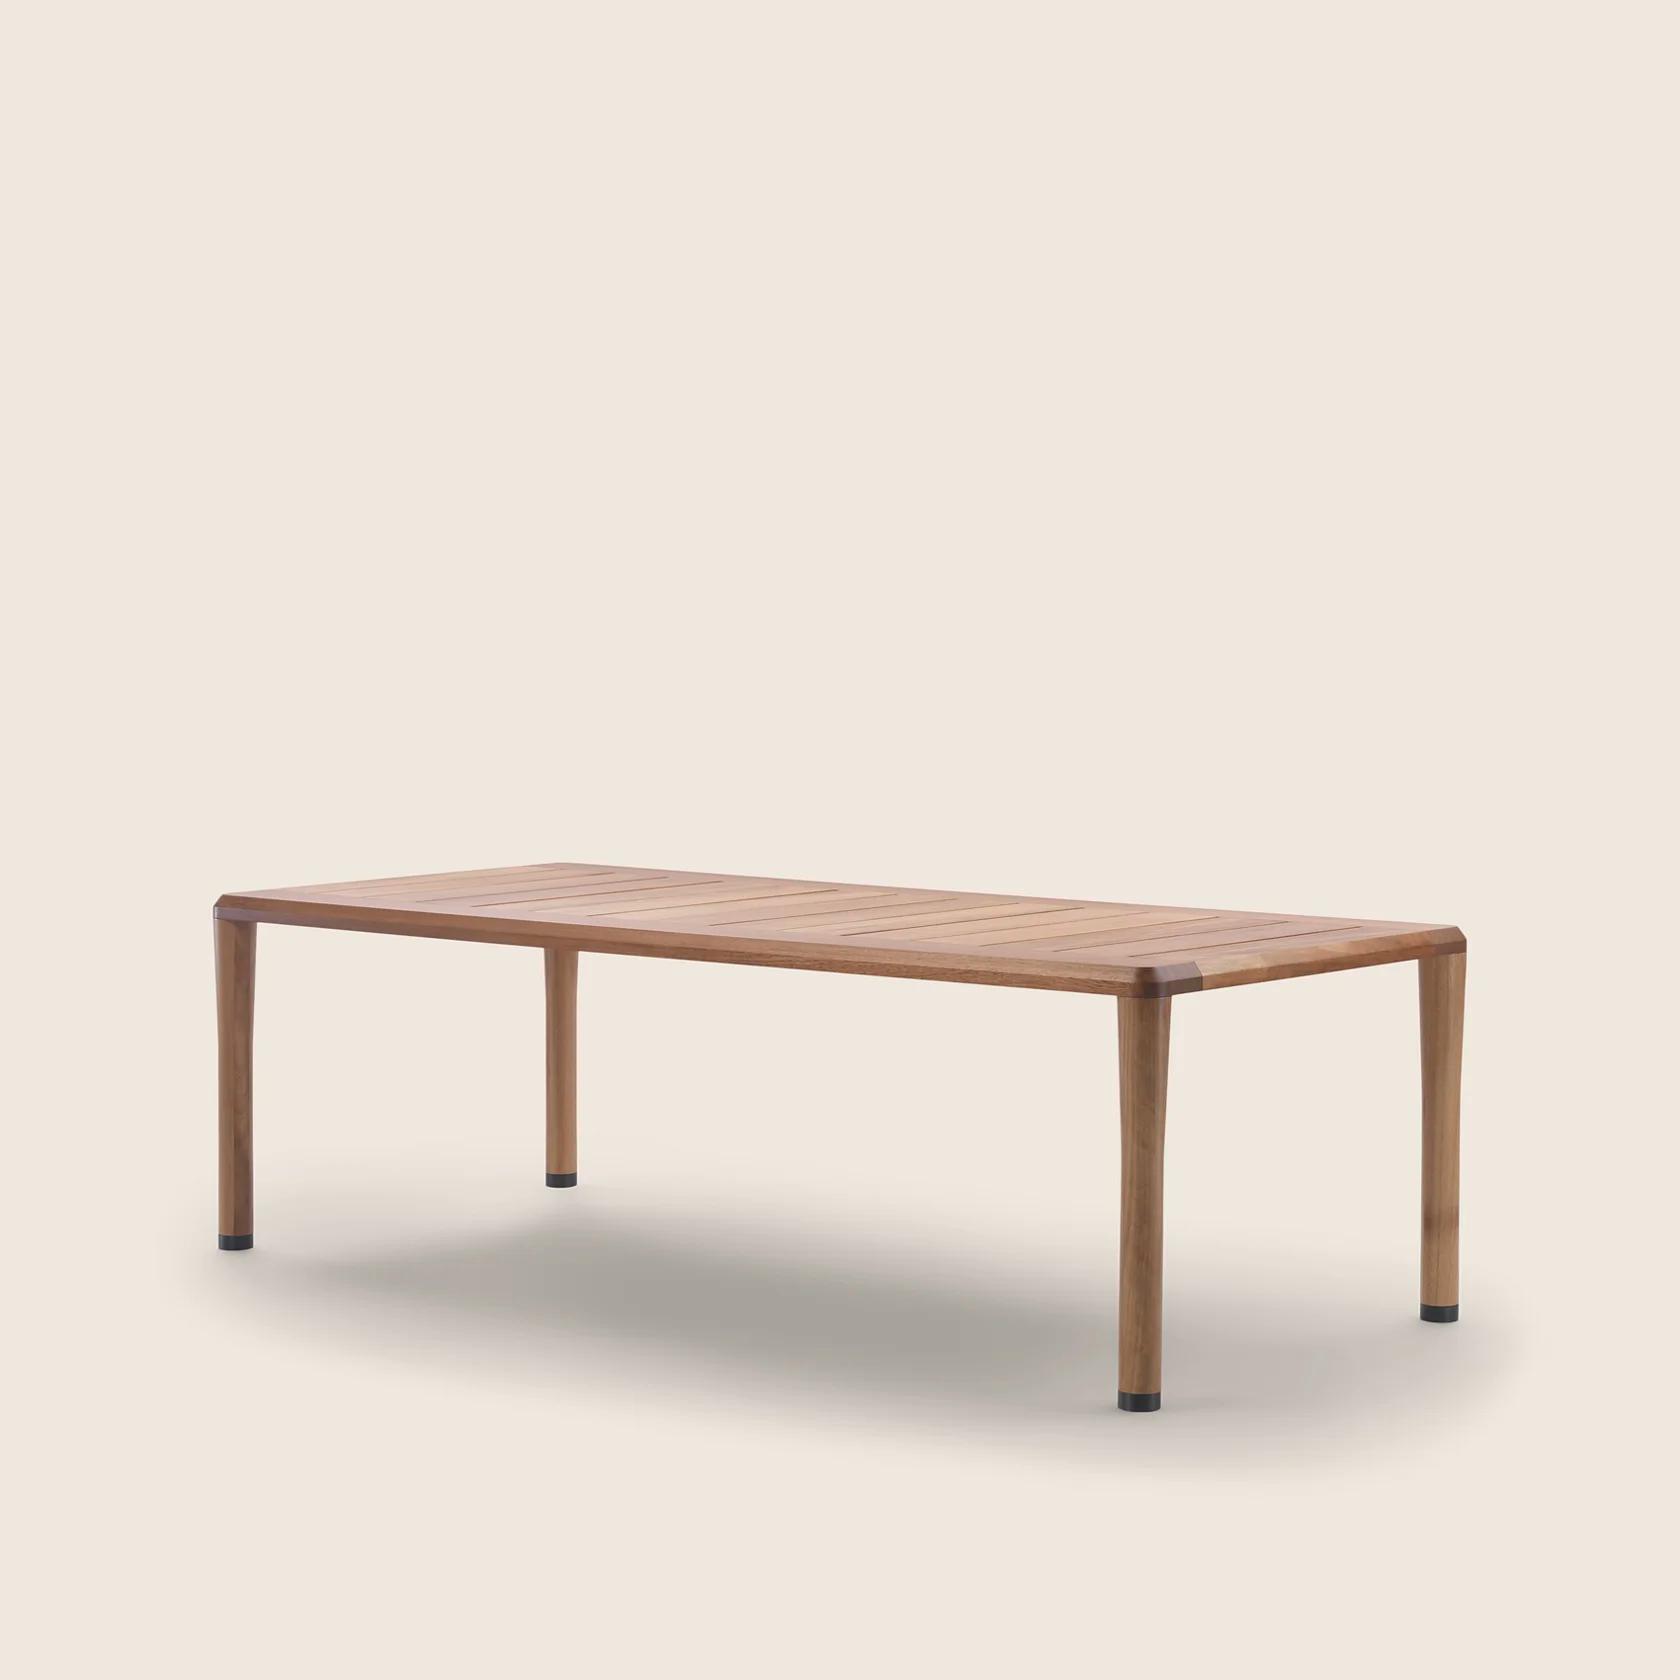 02B2L0_KOBO OUTDOOR_TABLE_02.png